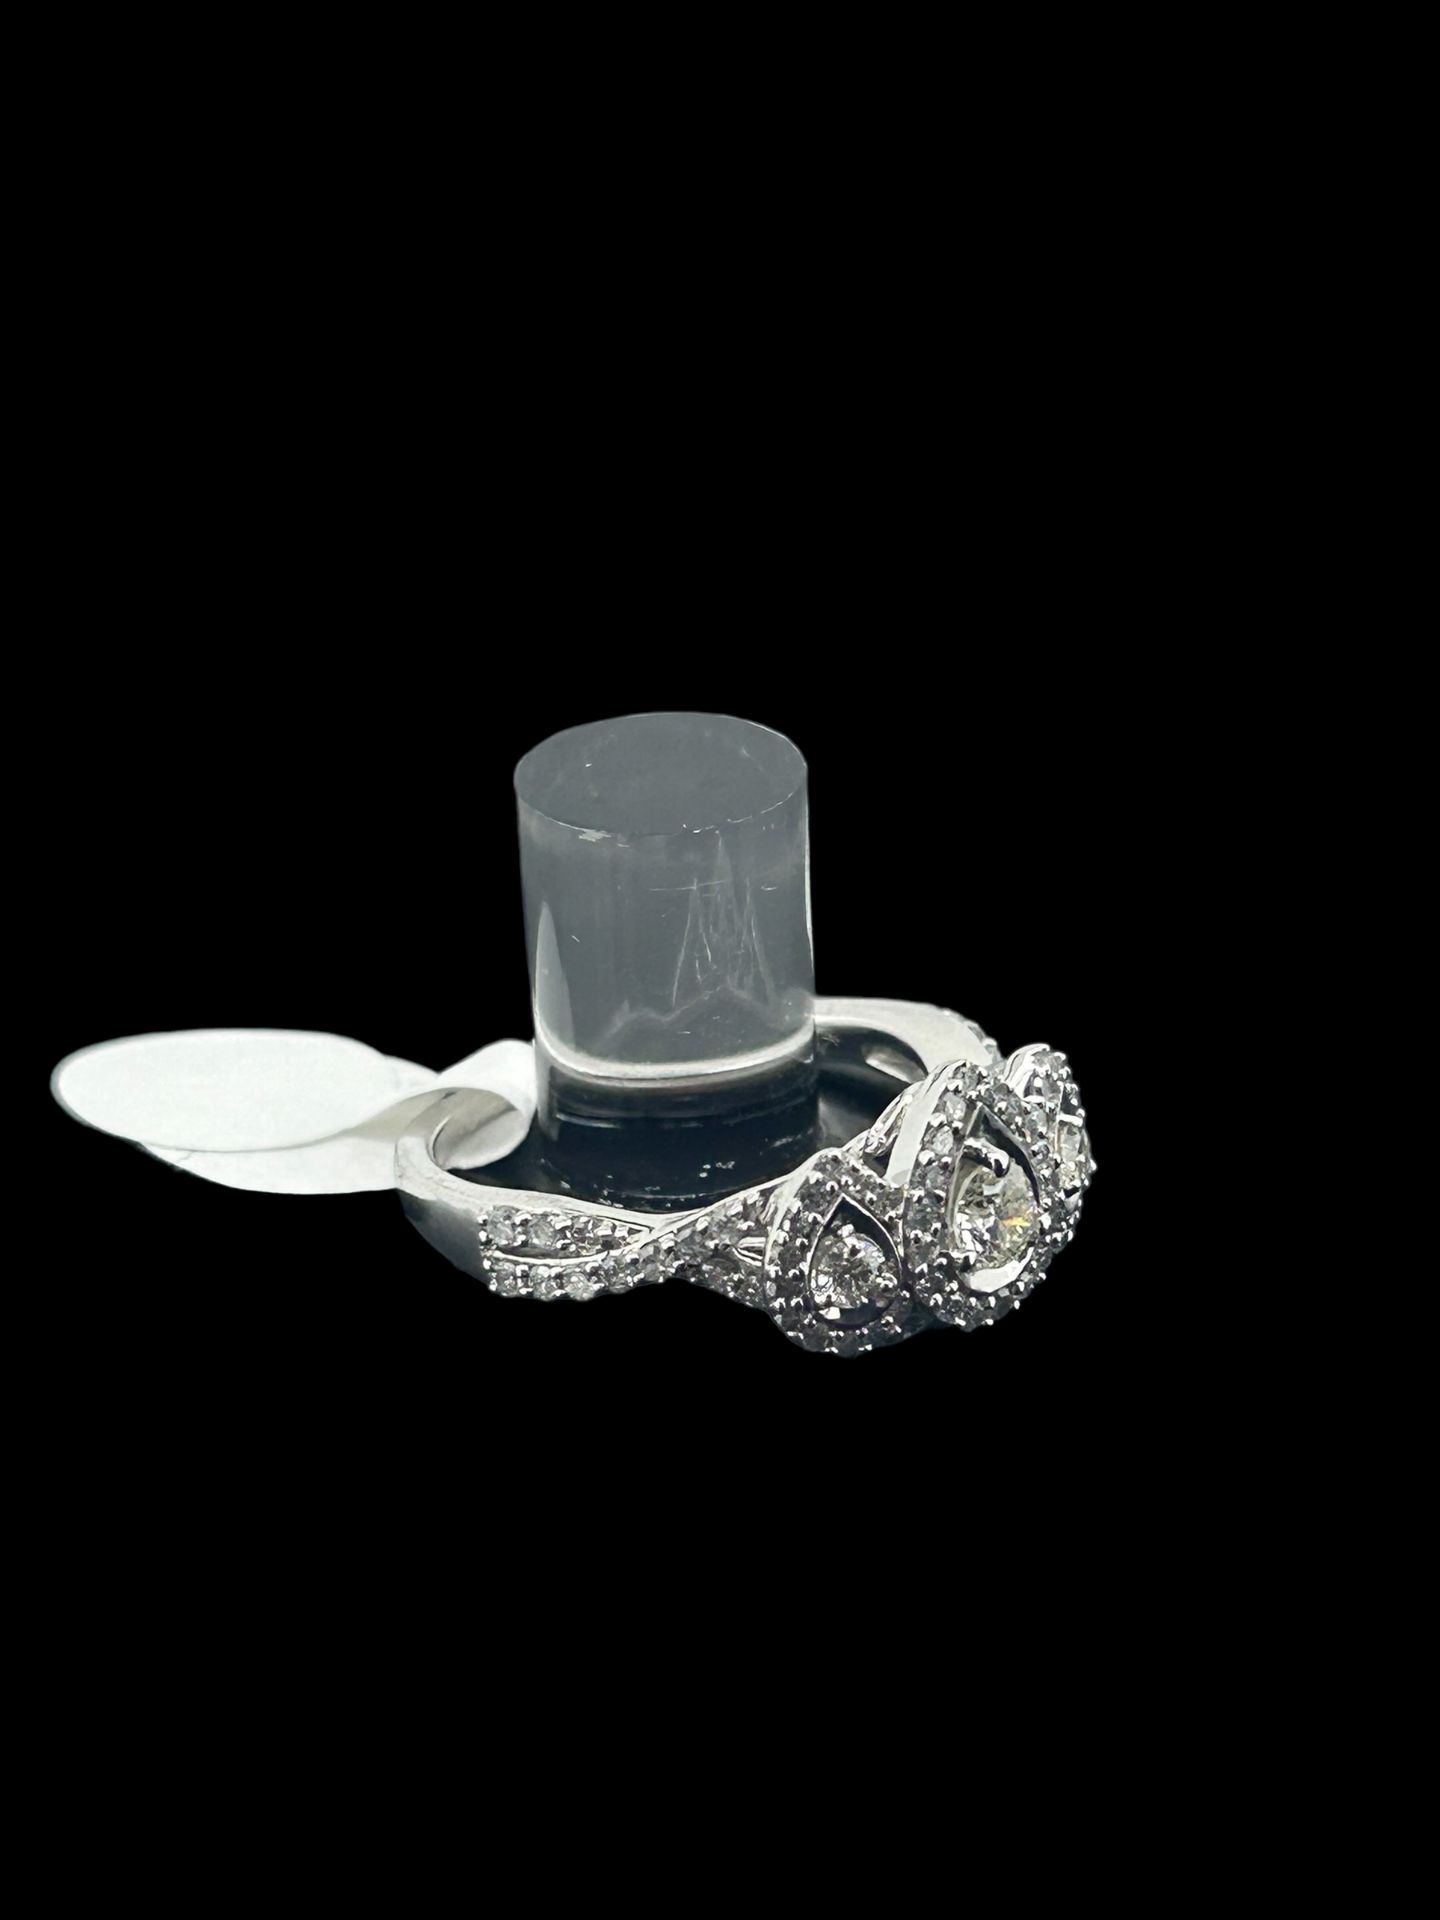 10k white gold cocktail ring, set with 1 carat of diamond - Image 2 of 3